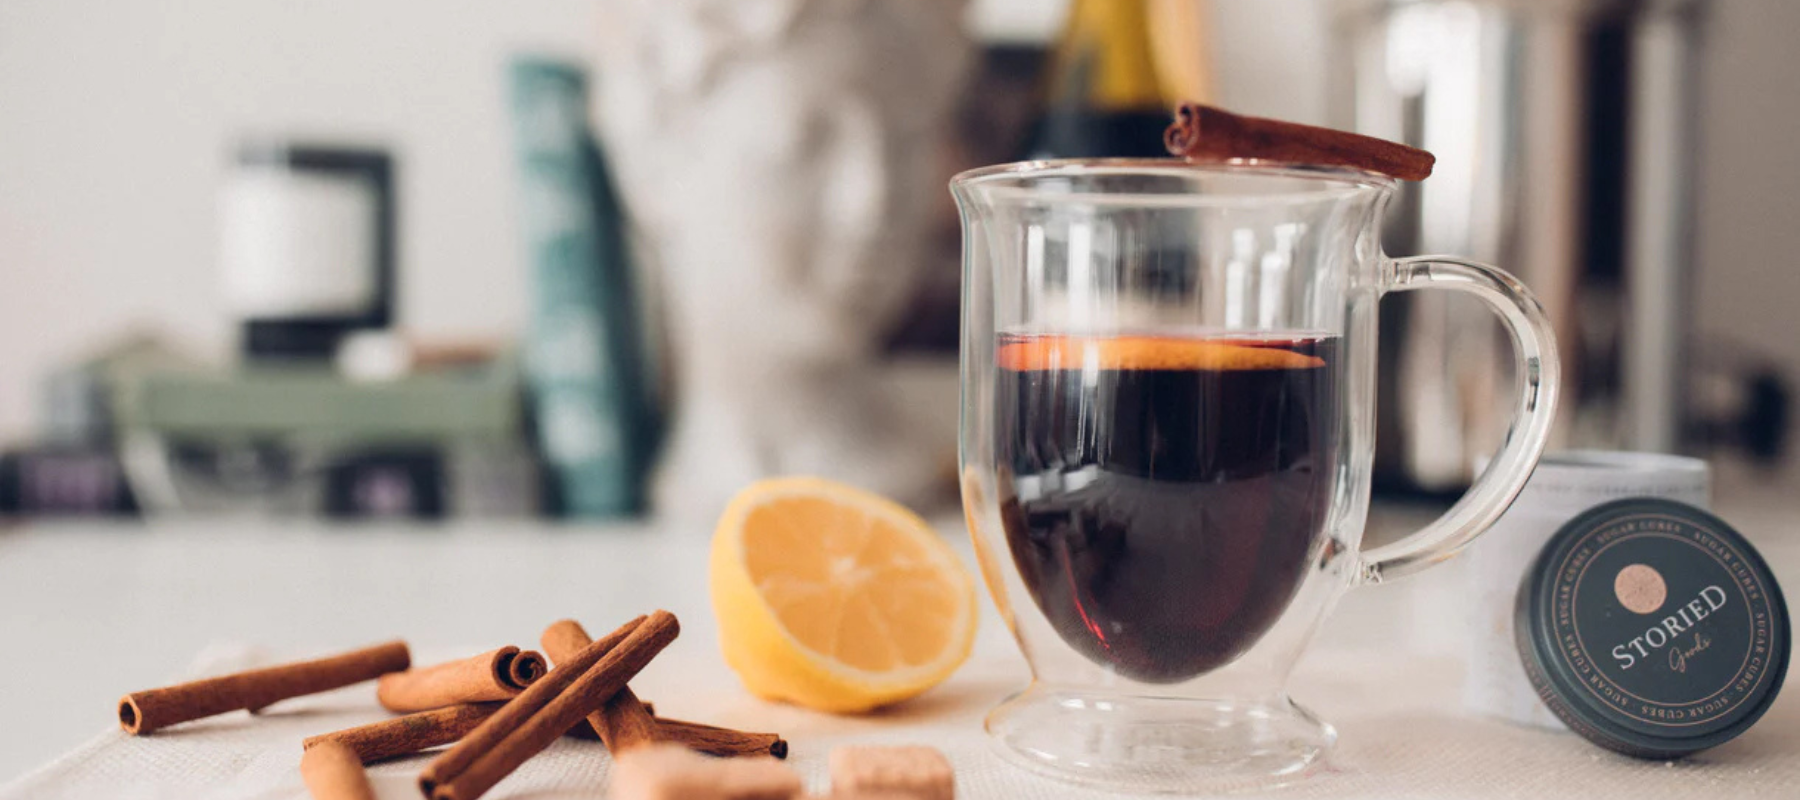 Storied Goods' Mulled Wine with oranges, cinnamon sticks, and sugar cubes